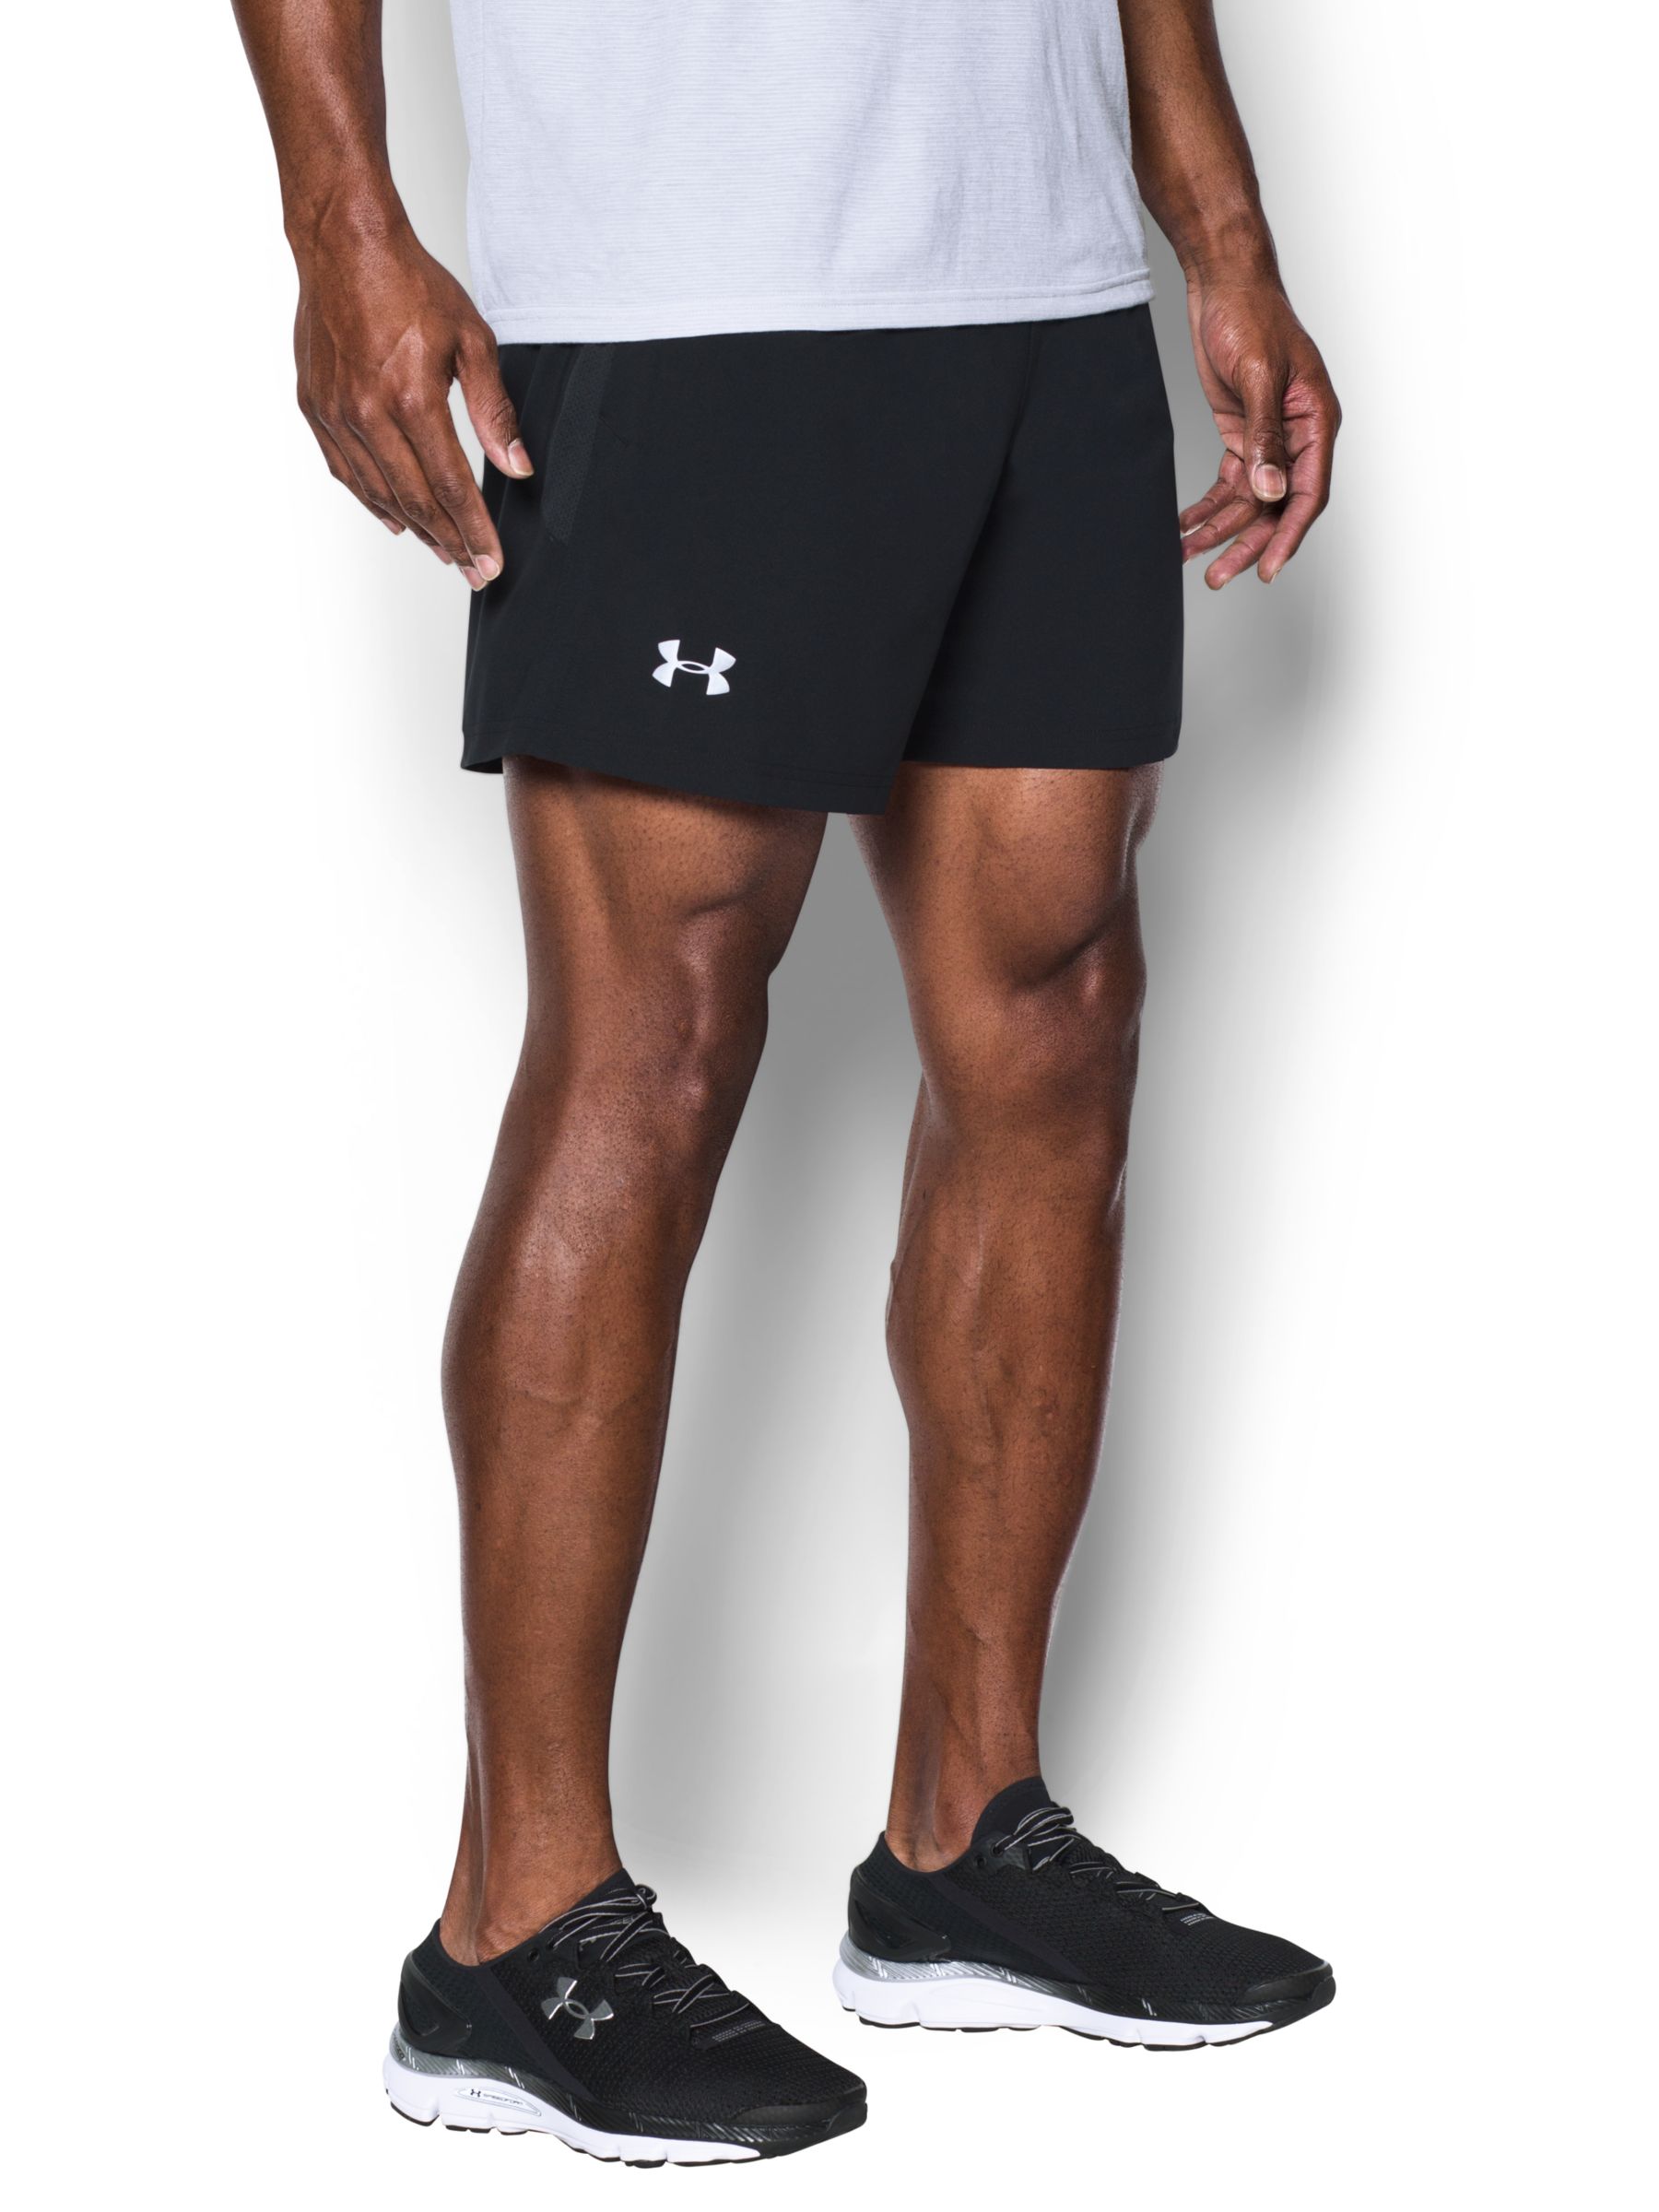 under armour 5 inch shorts